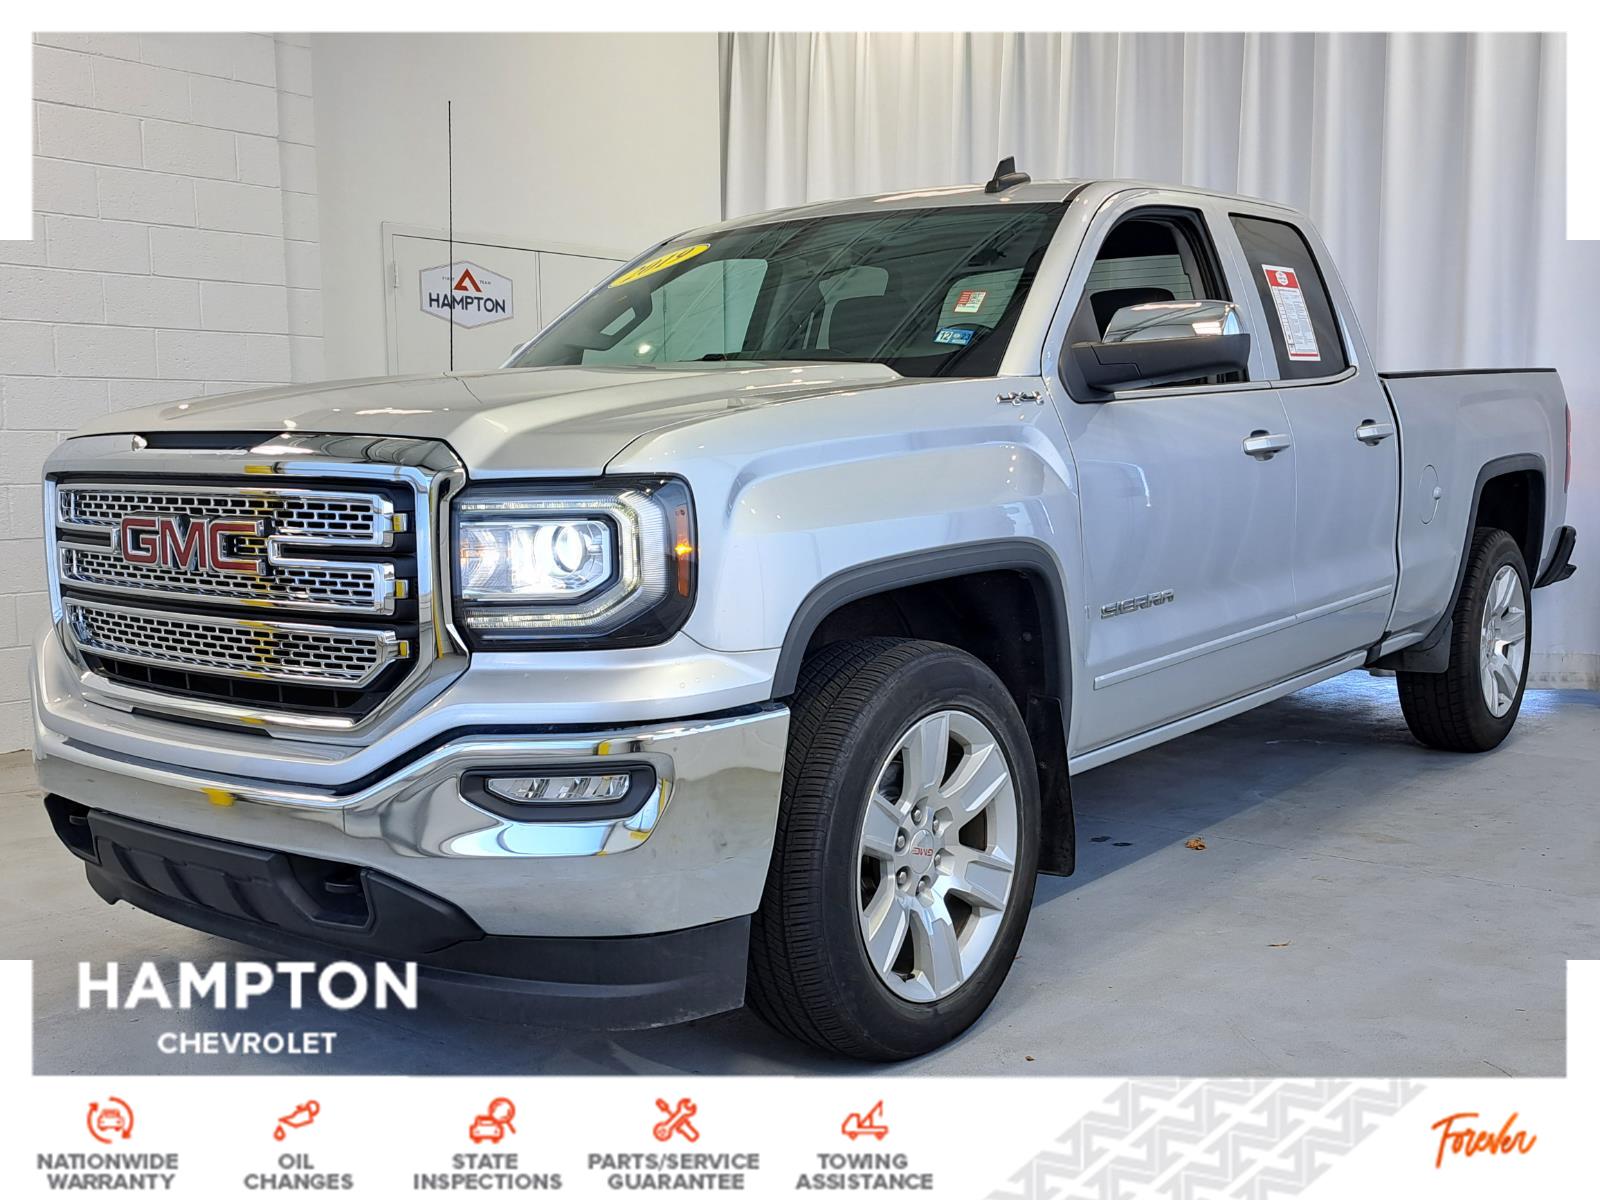 2019 GMC Sierra 1500 Limited SLE Extended Cab Pickup Four Wheel Drive